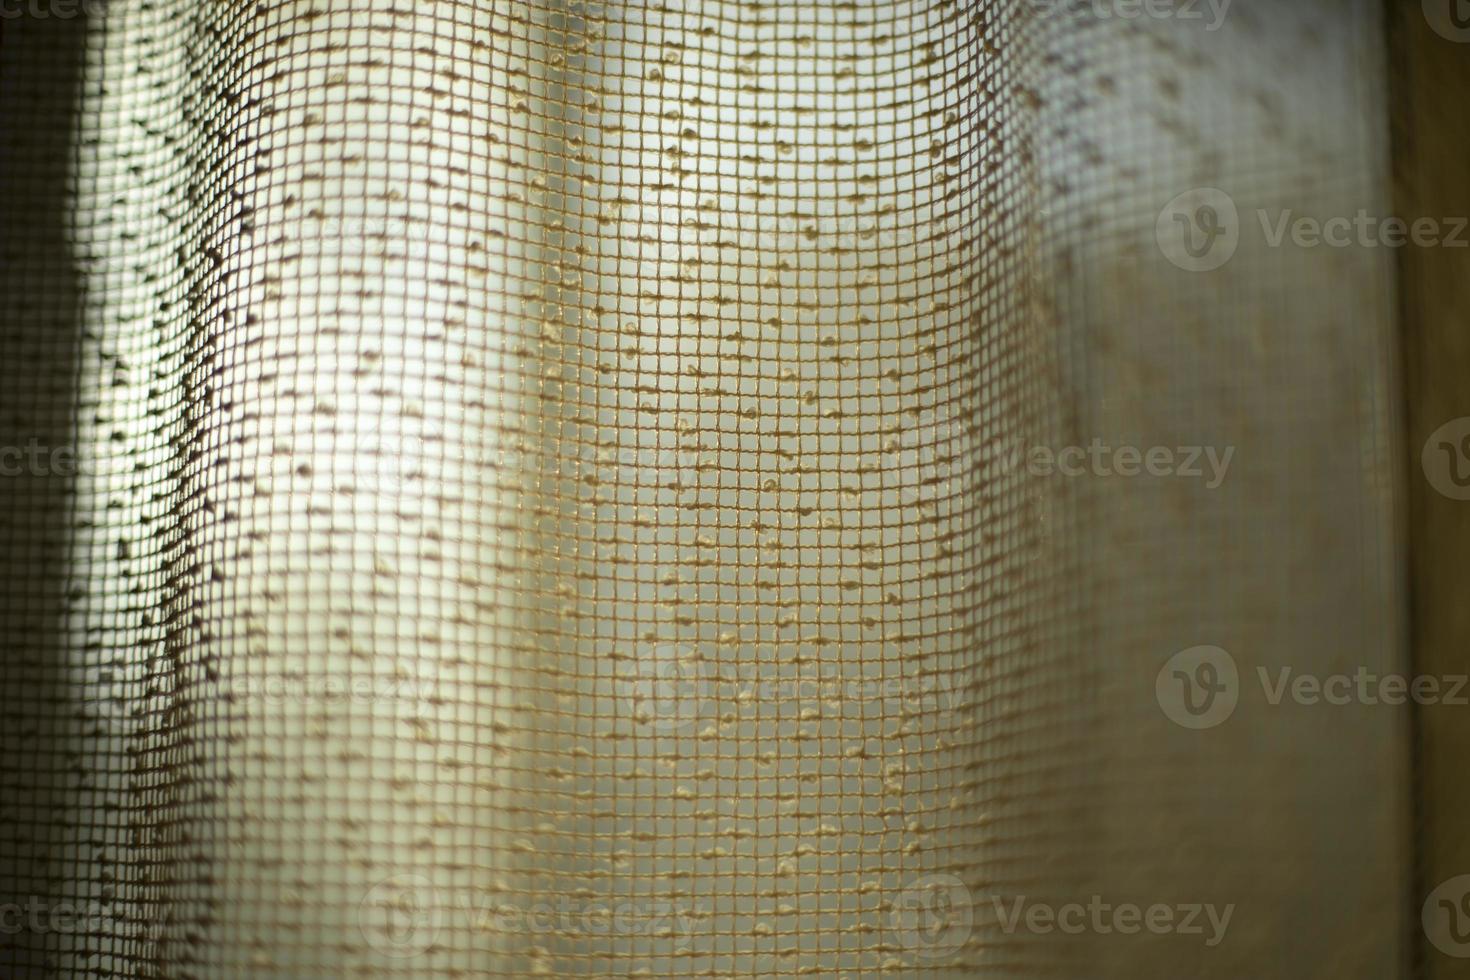 Curtains on window. Light through curtains. Fabric texture. structure of fine grid. photo